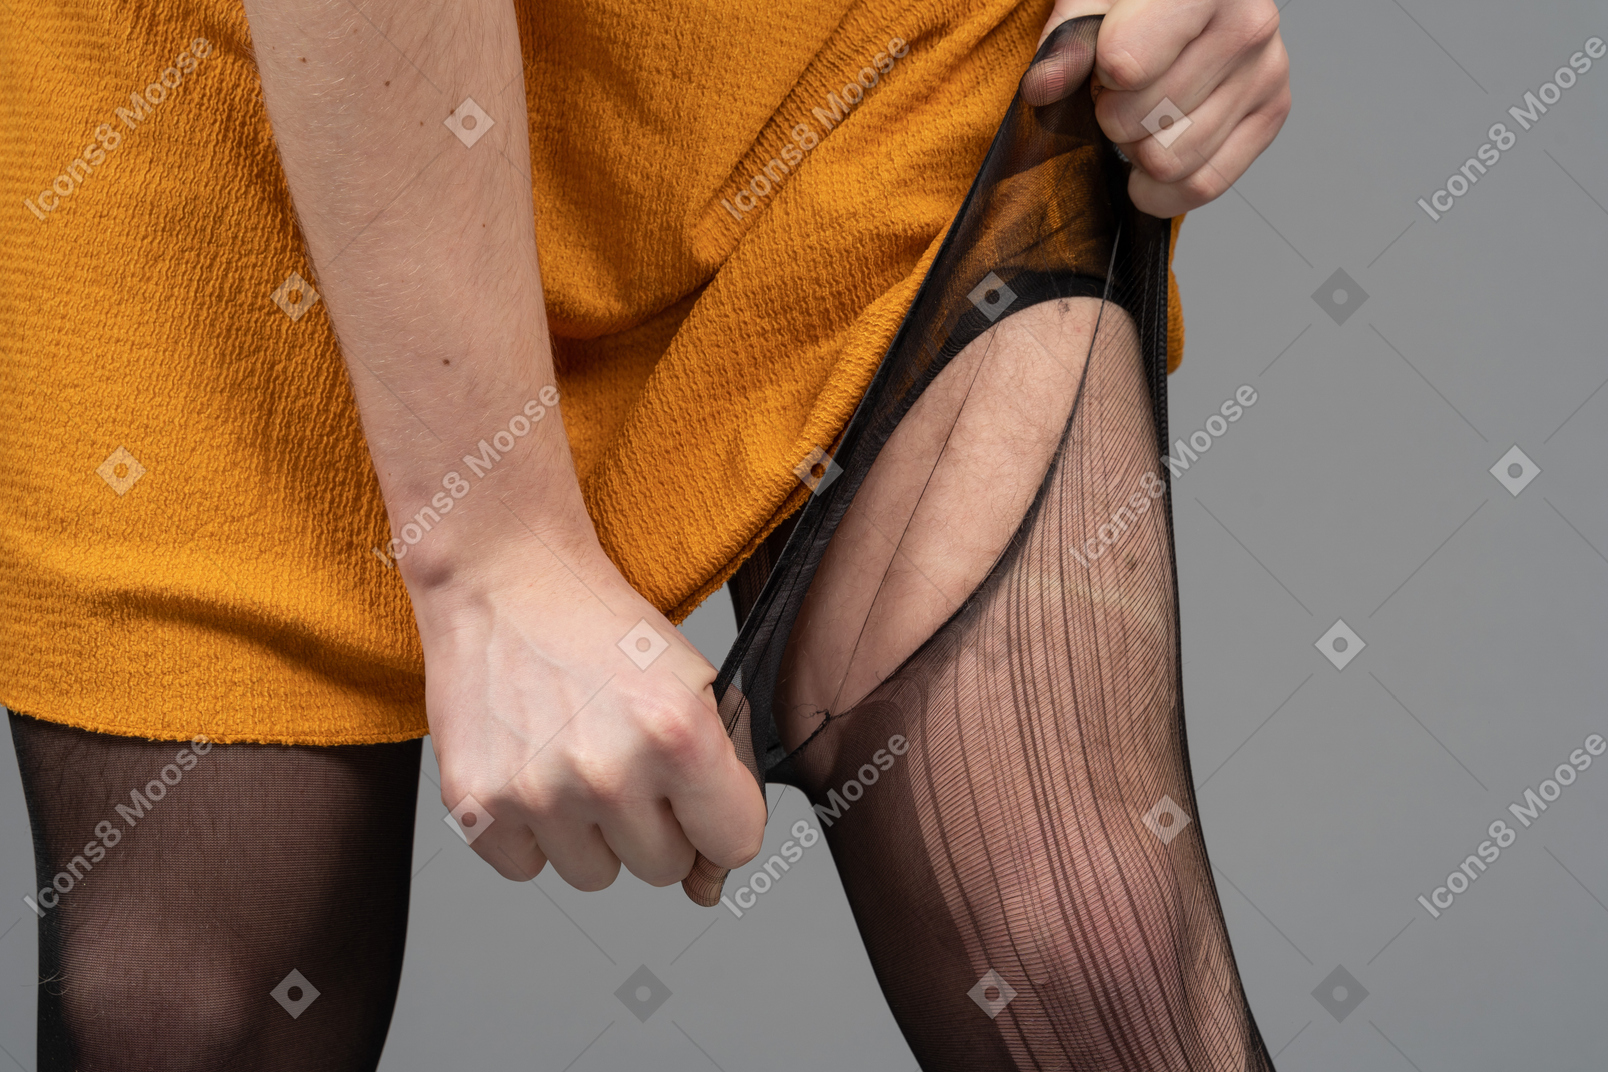 Cropped photo of a person in orange dress ripping tights